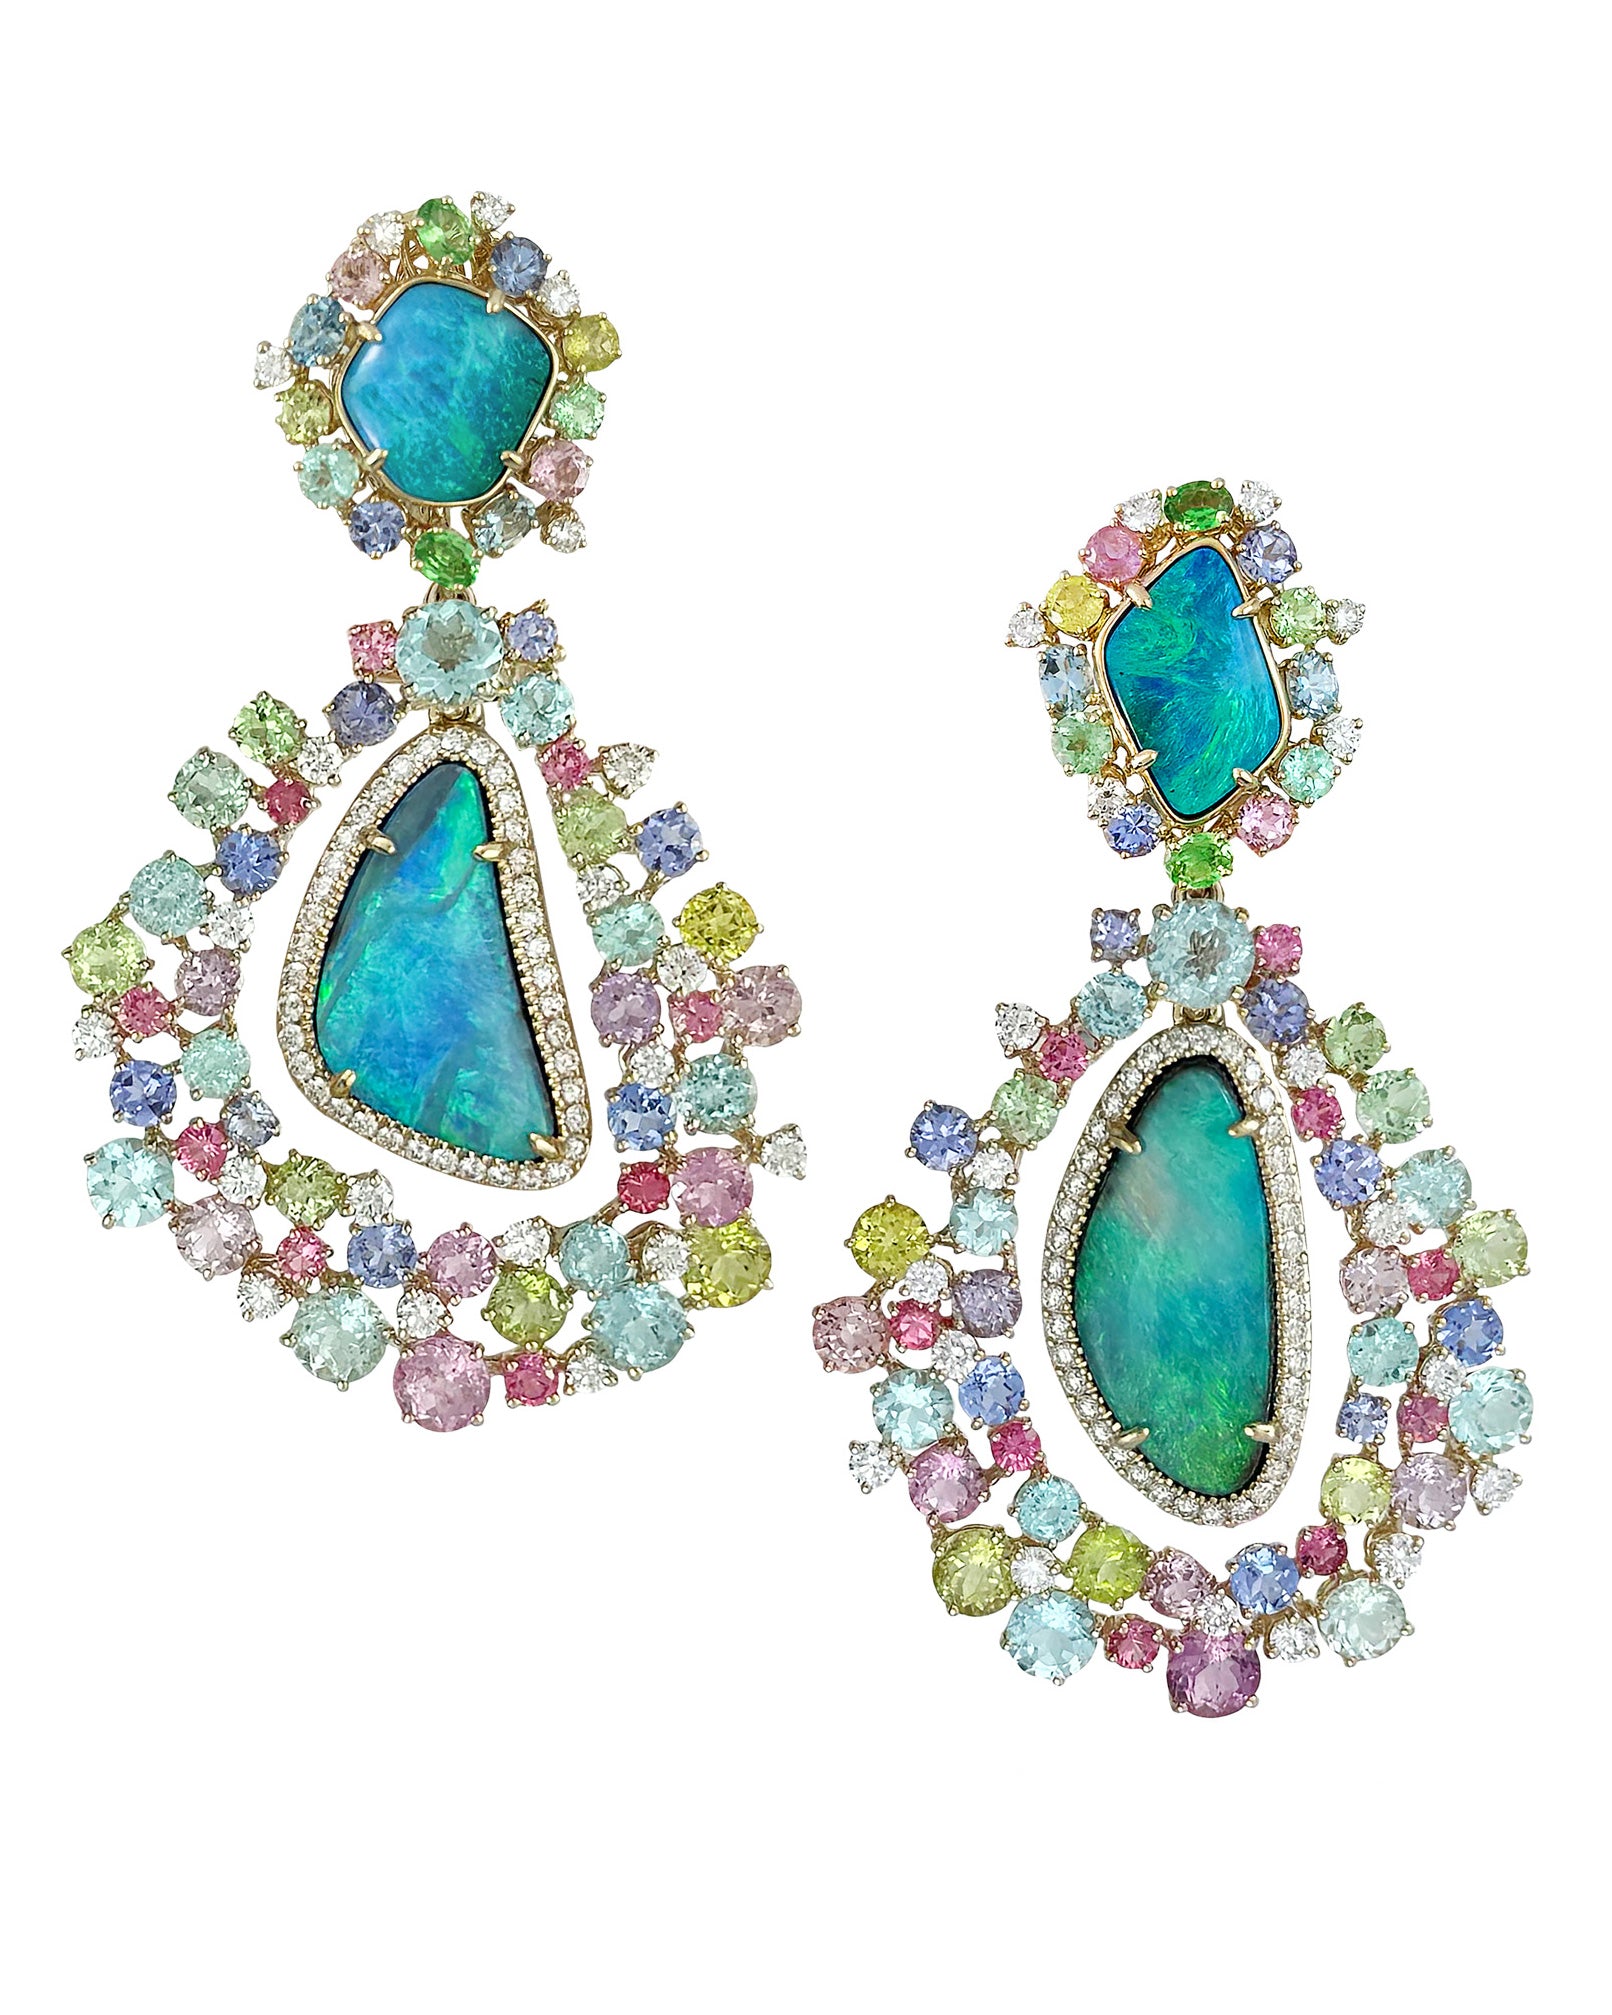 Australian Boulder Opal 21.28ct Earrings surrounded by multi-coloured Sapphires and Diamonds